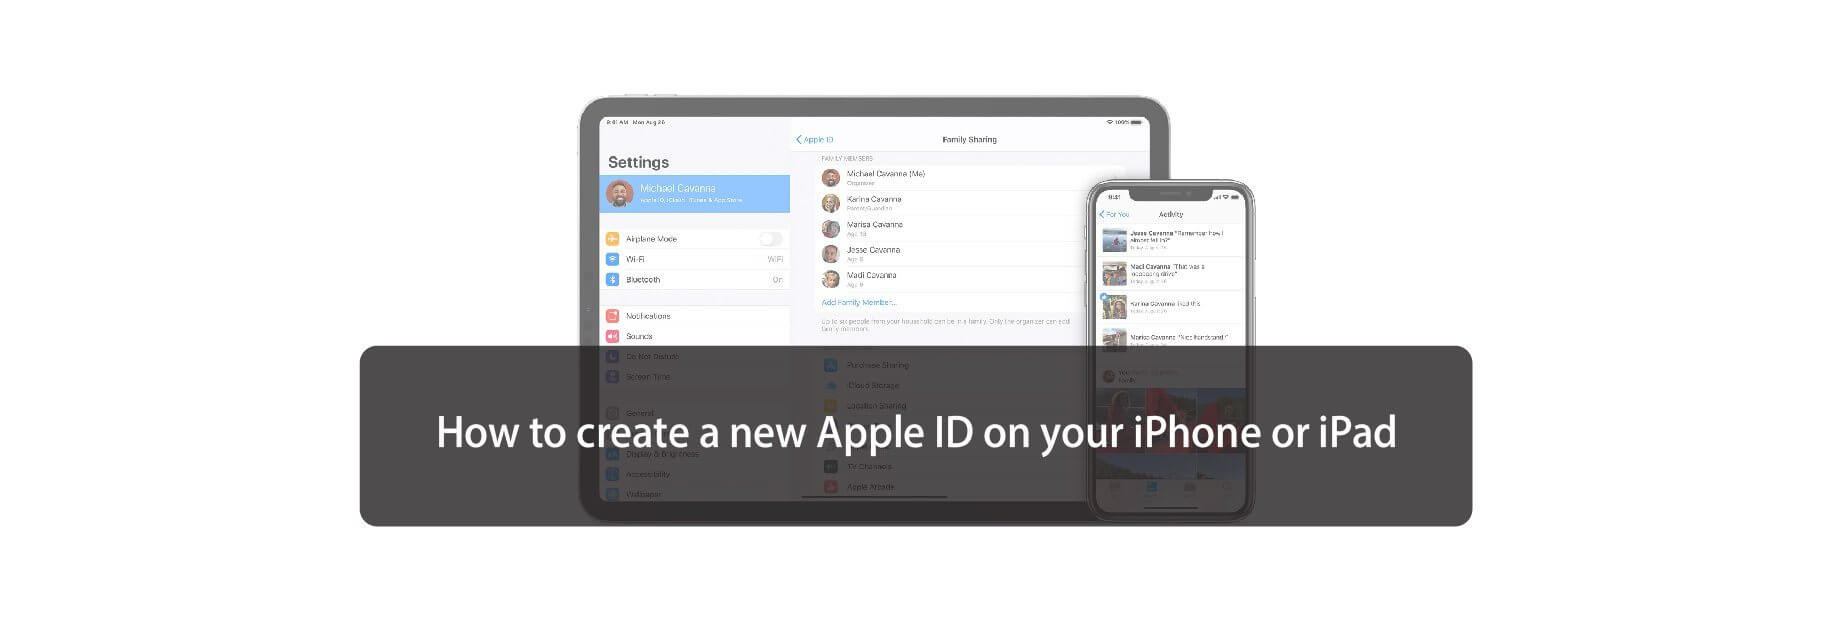 Set up your iPhone or iPad - Apple Support